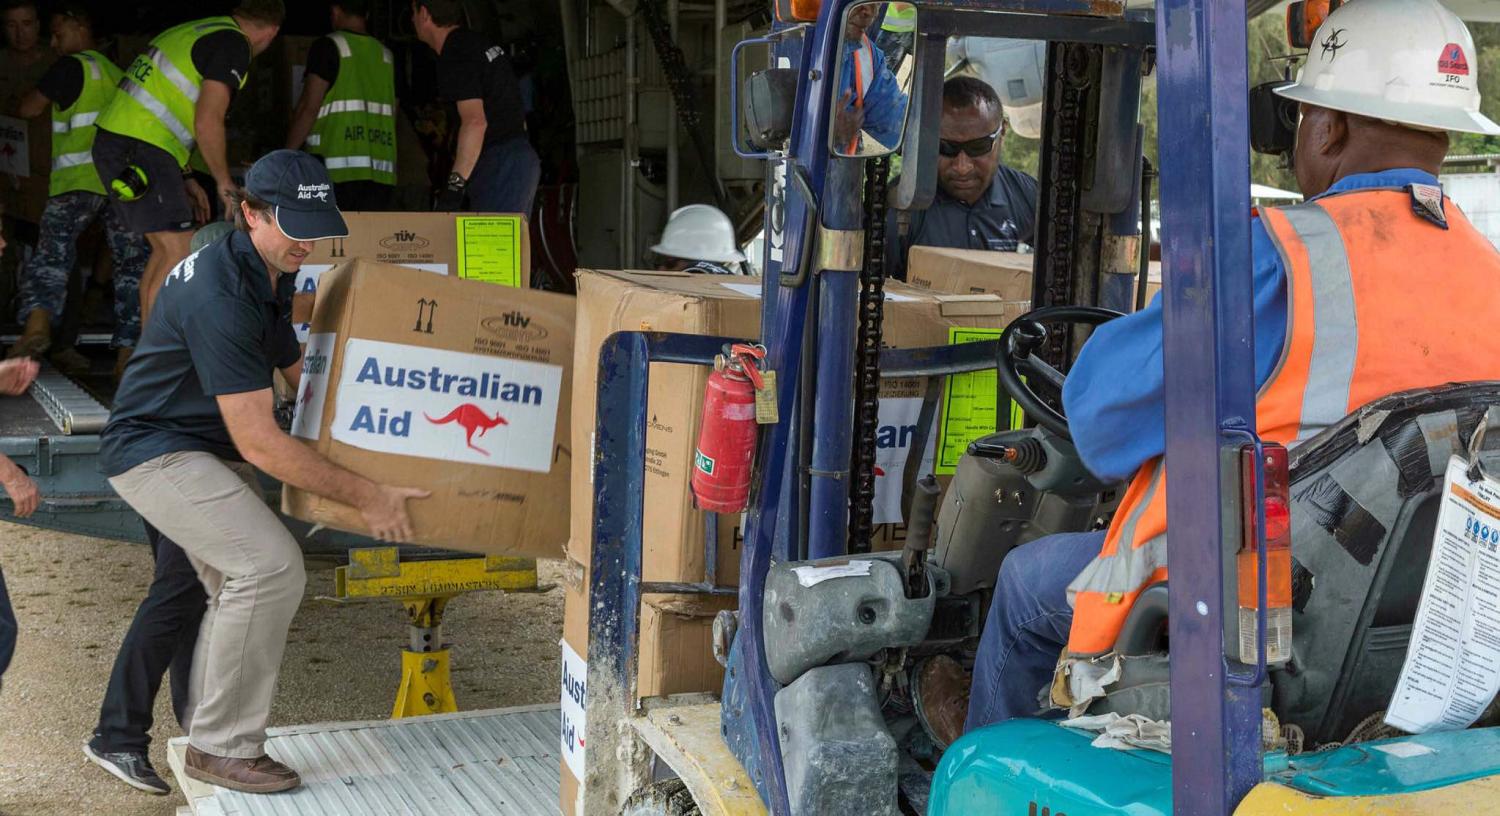 Disaster relief supplies from Australia arrive in PNG (Photo: Defence Department)